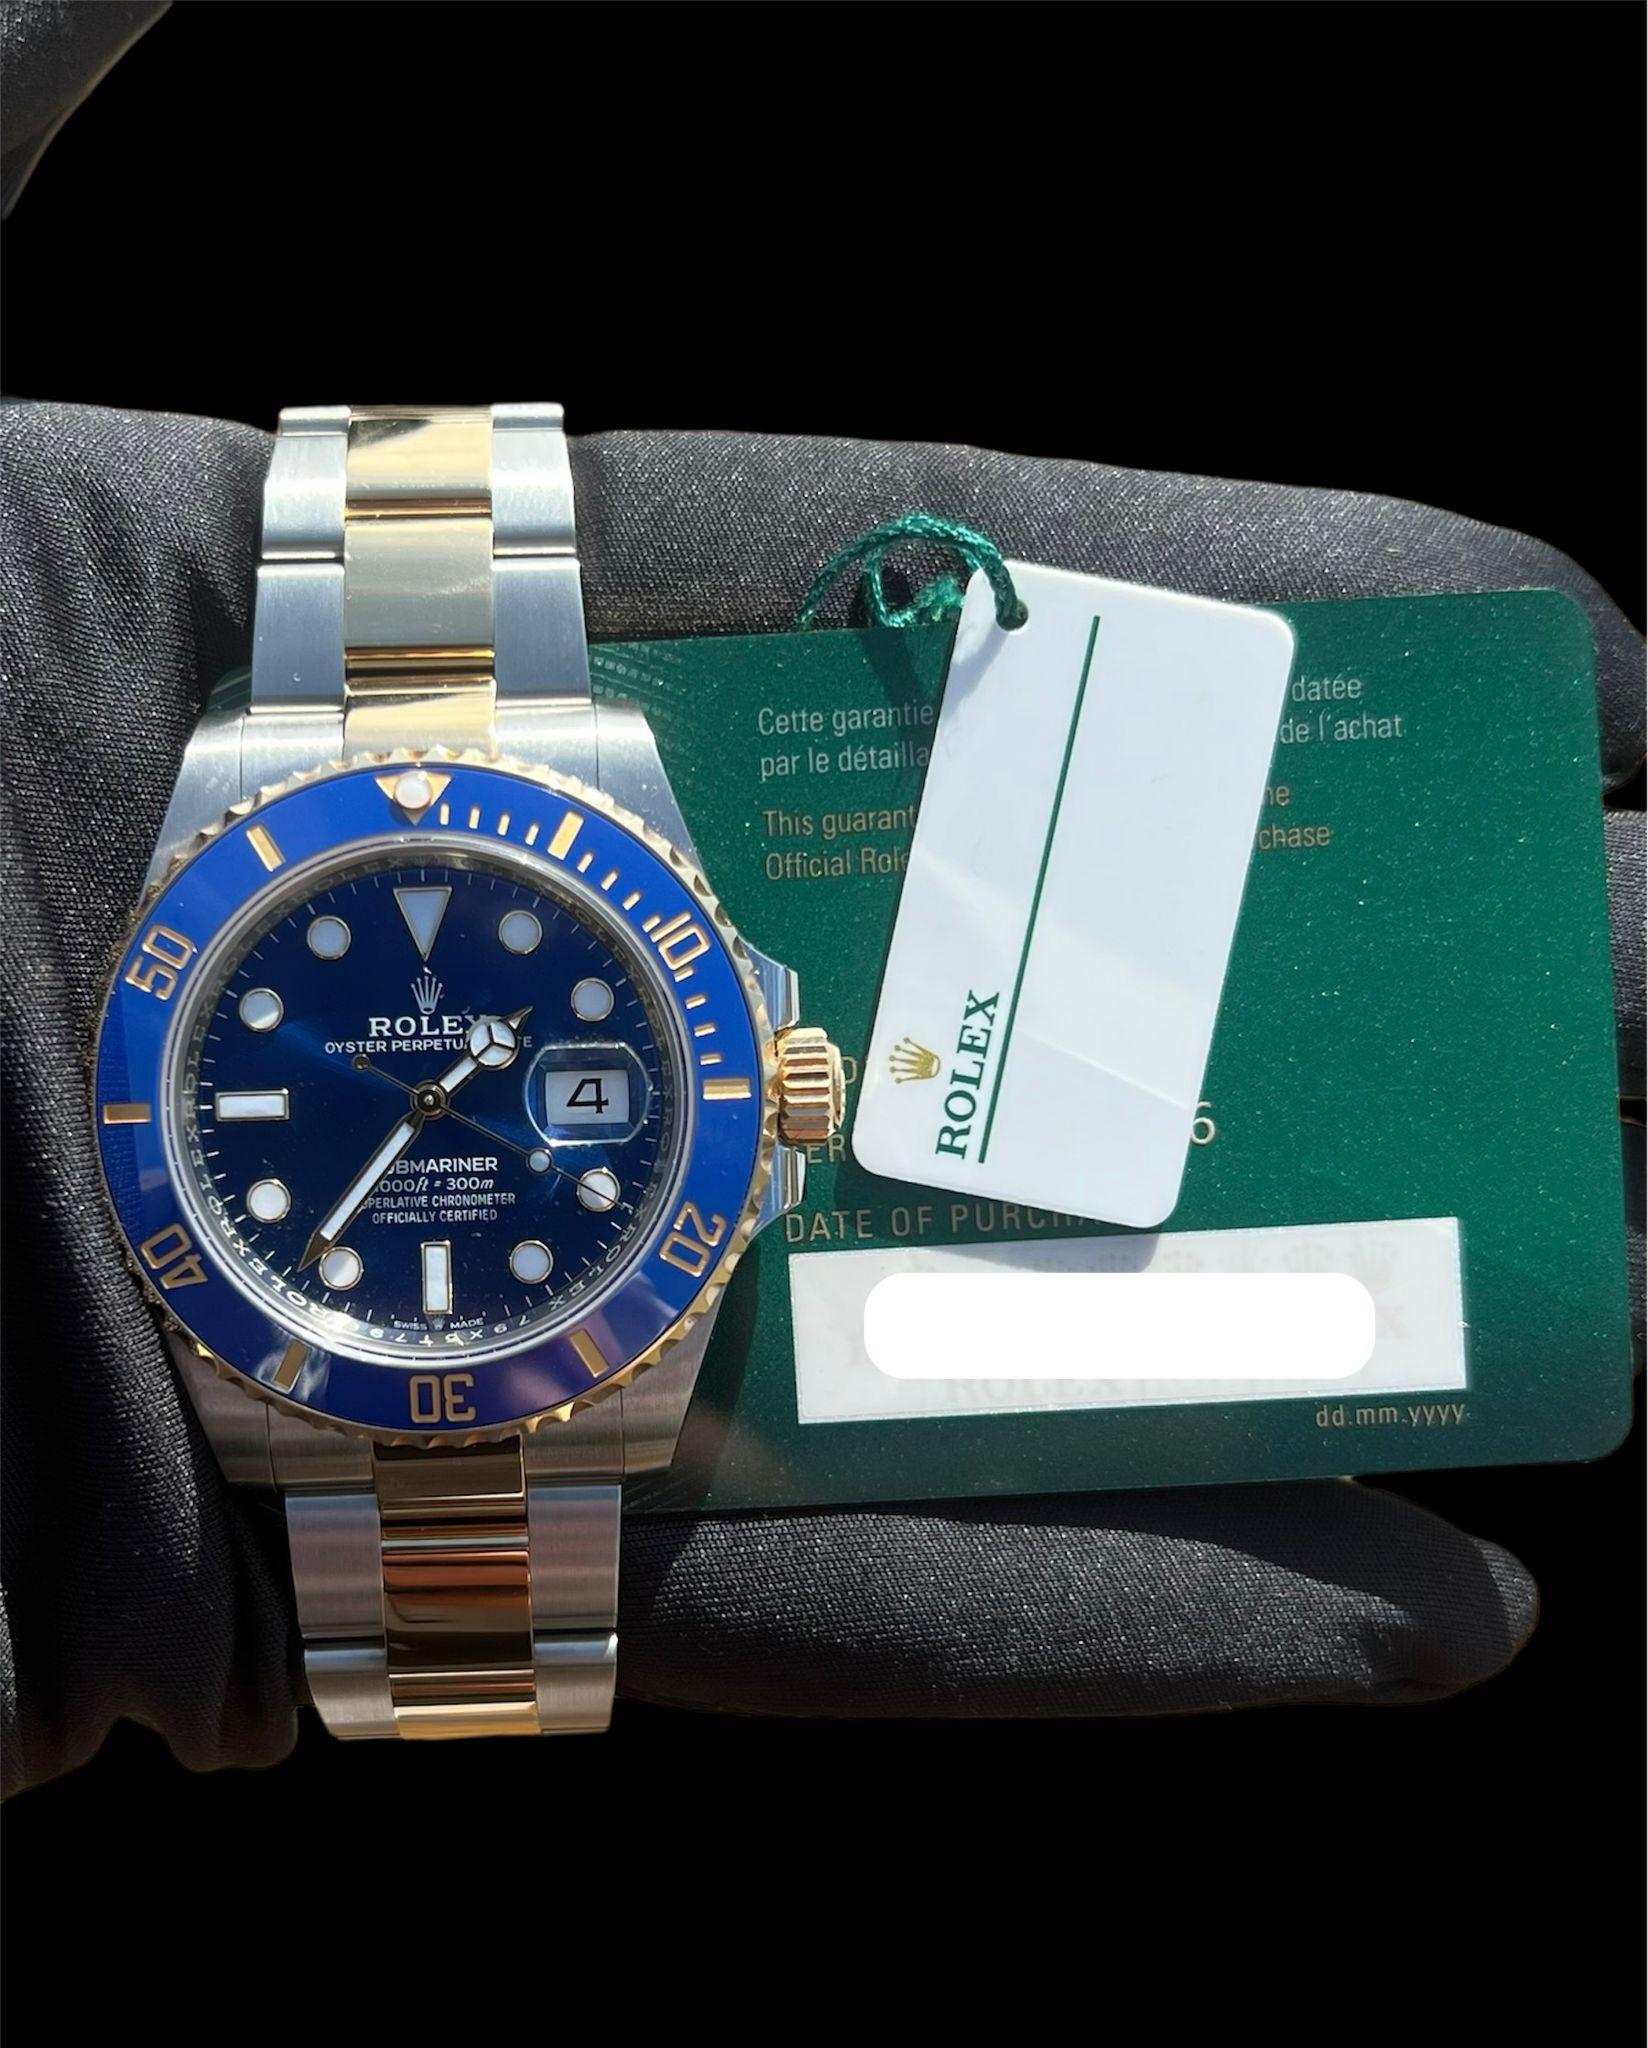 Brand new Rolex Submariner, Reference # 126613lb-0002, 41 mm. Yellow Rolesor - a combination of Oystersteel and 18 ct yellow gold watch with all original accessories, original Rolex box, and Rolex Warranty Card.
Unworn Rolex Submariner